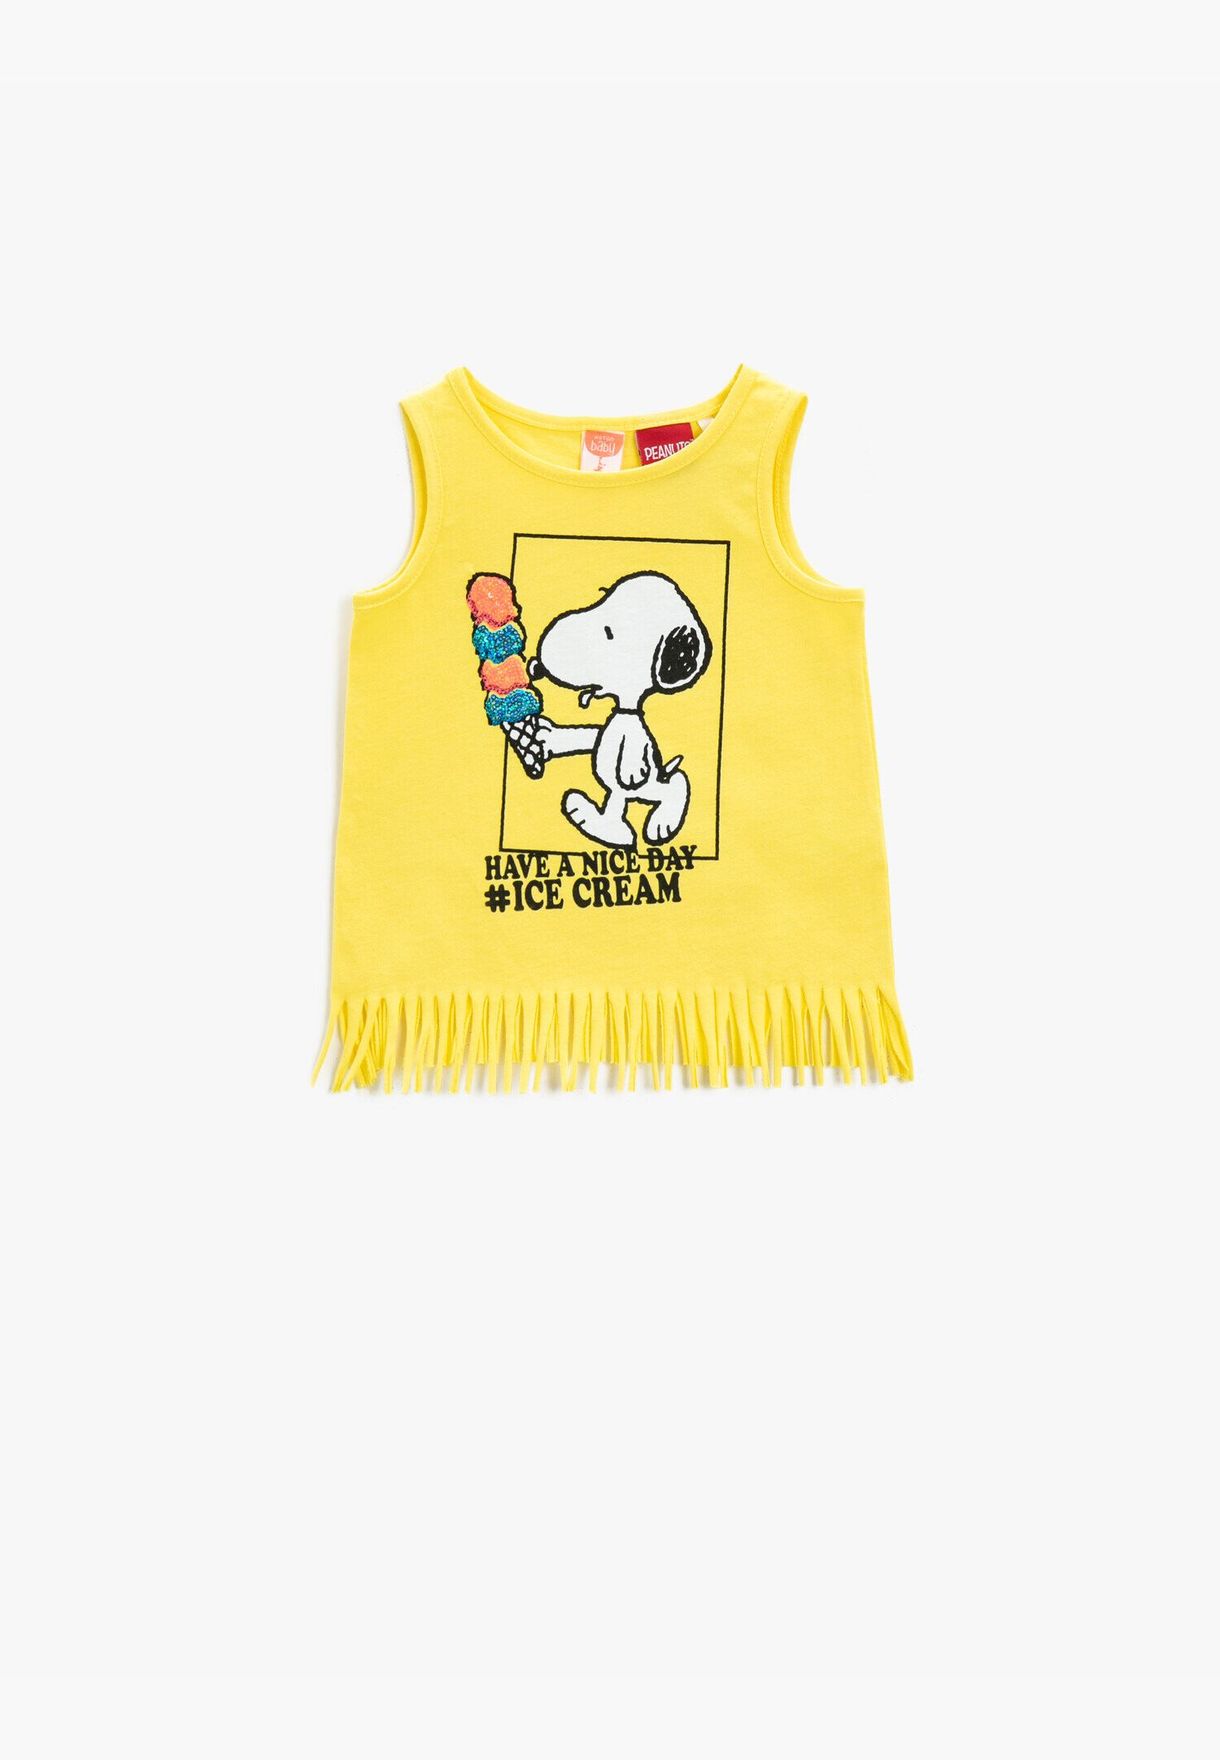 Snoopy Tank Top Cotton Fringed Licensed Printed